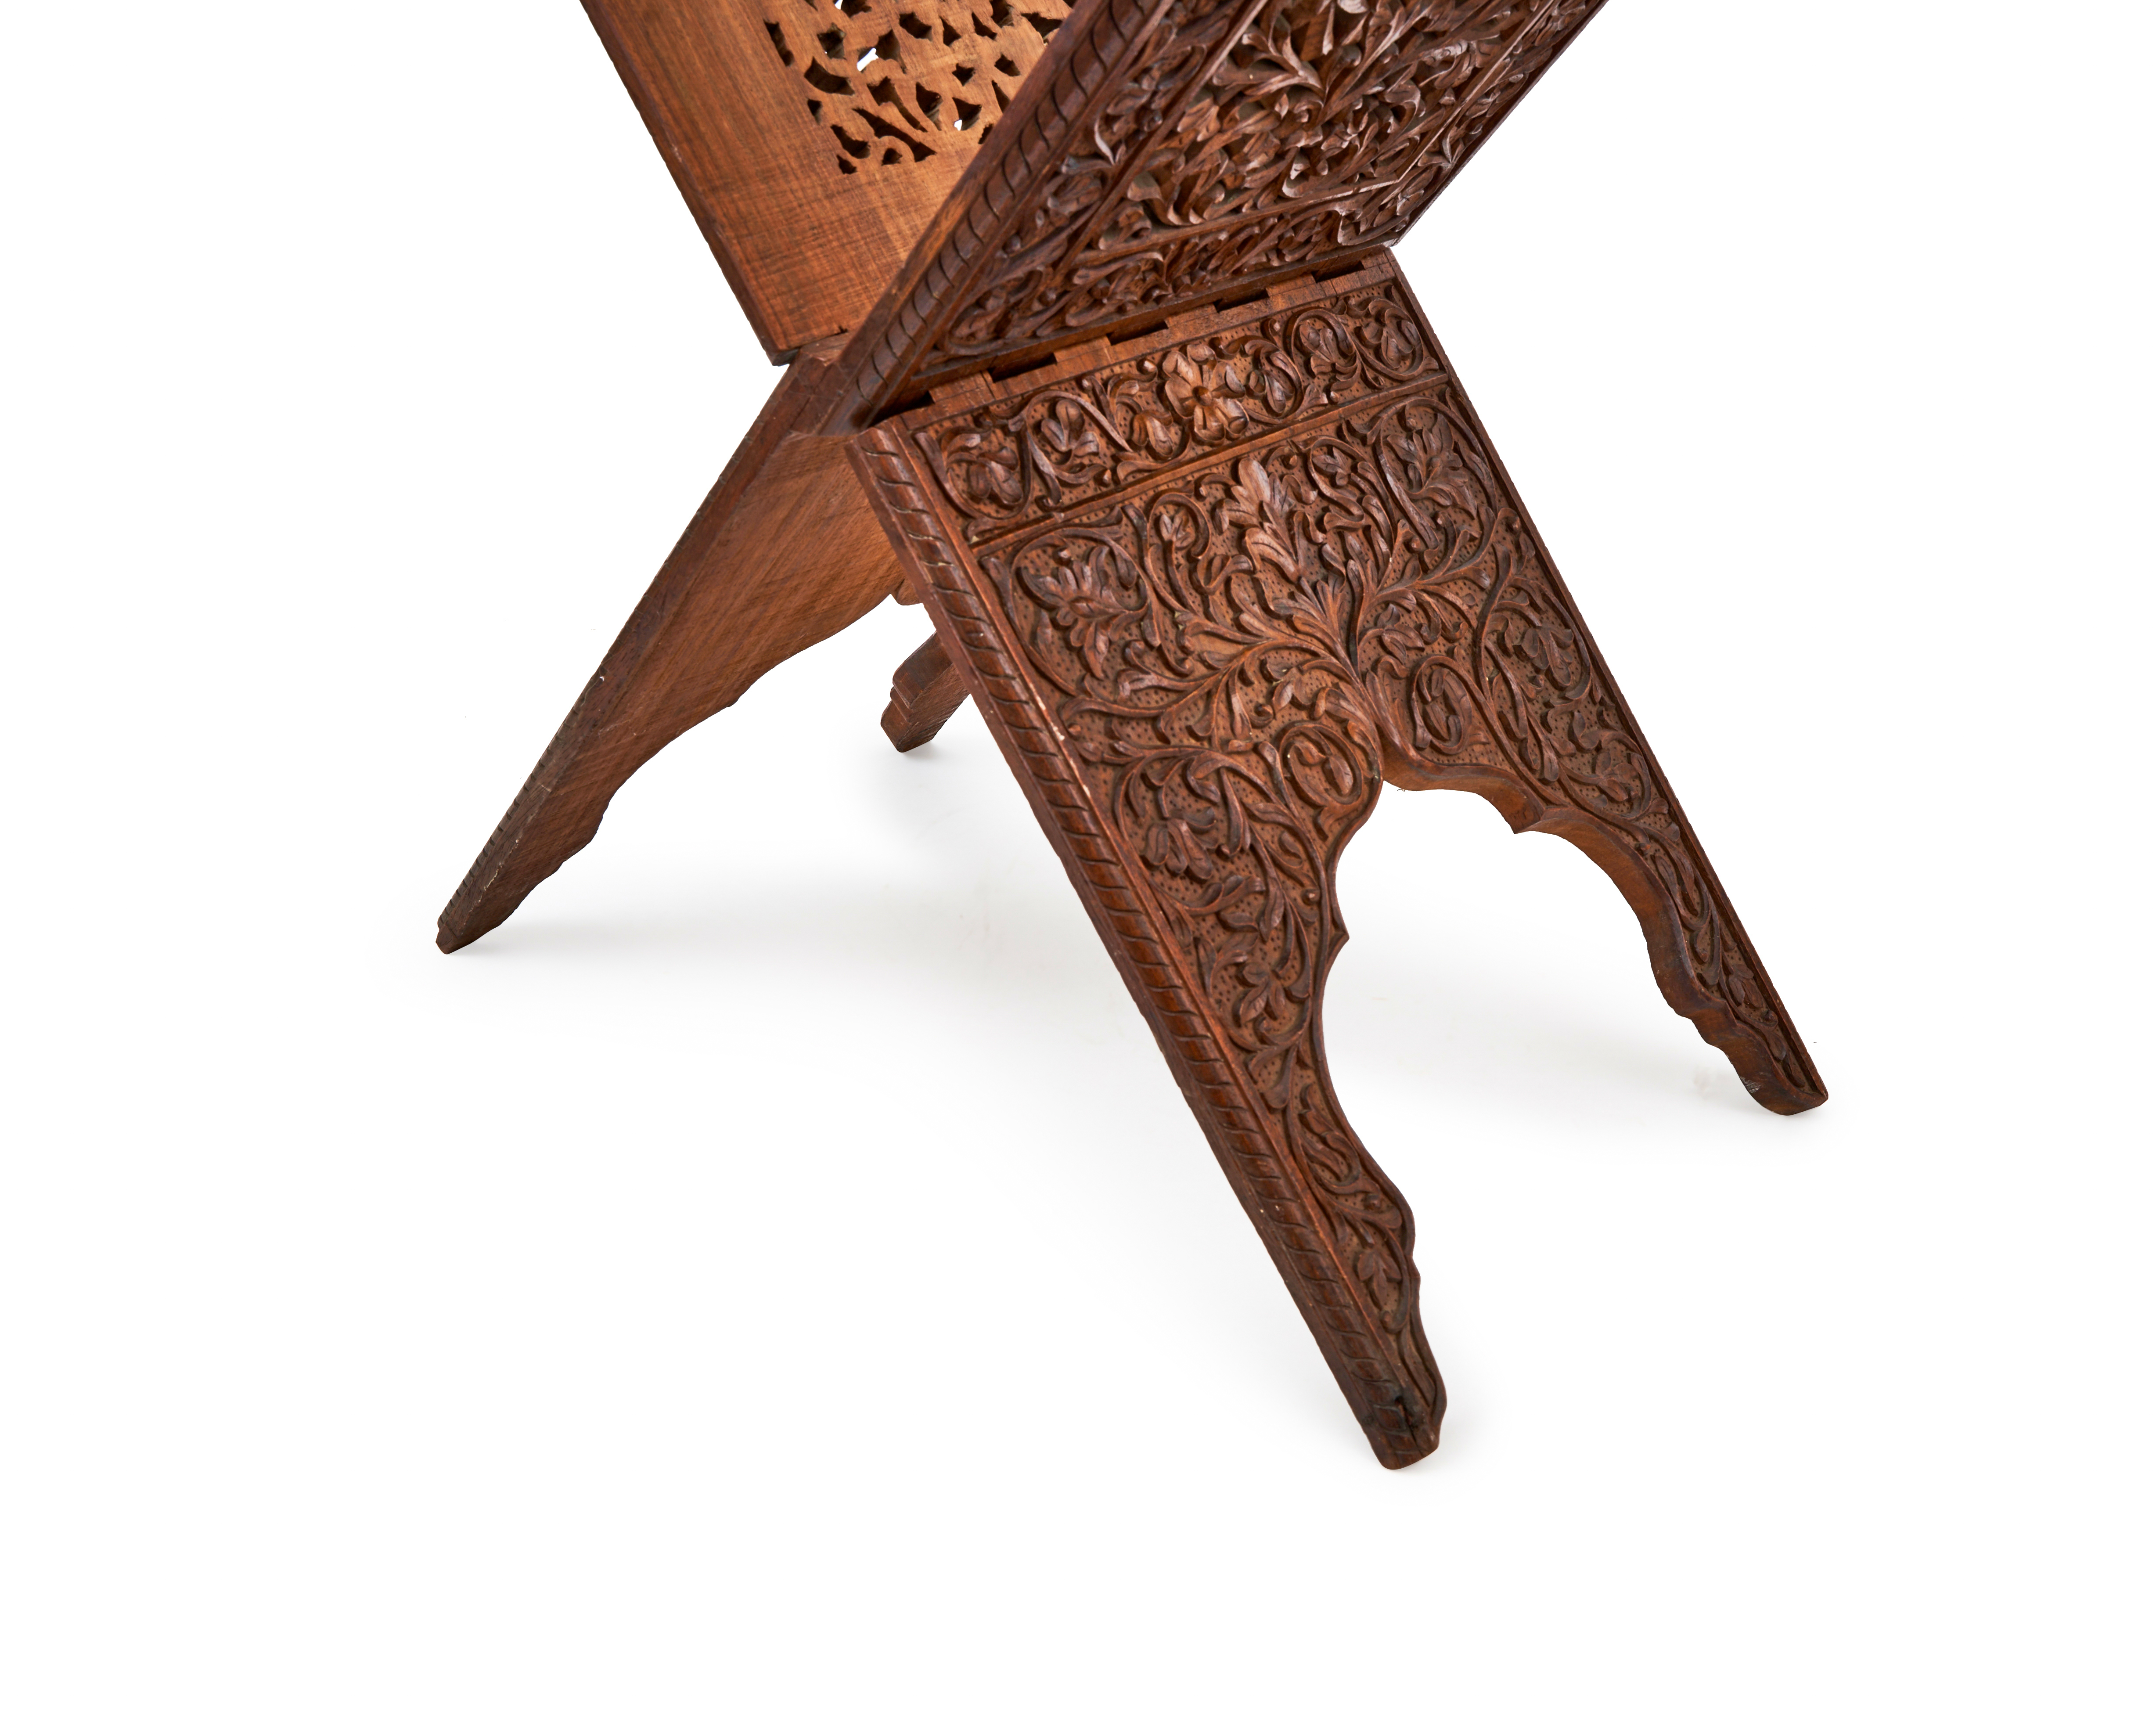 A WOODEN QURAN STAND, PROBABLY INDIA, 19TH CENTURY - Image 6 of 6